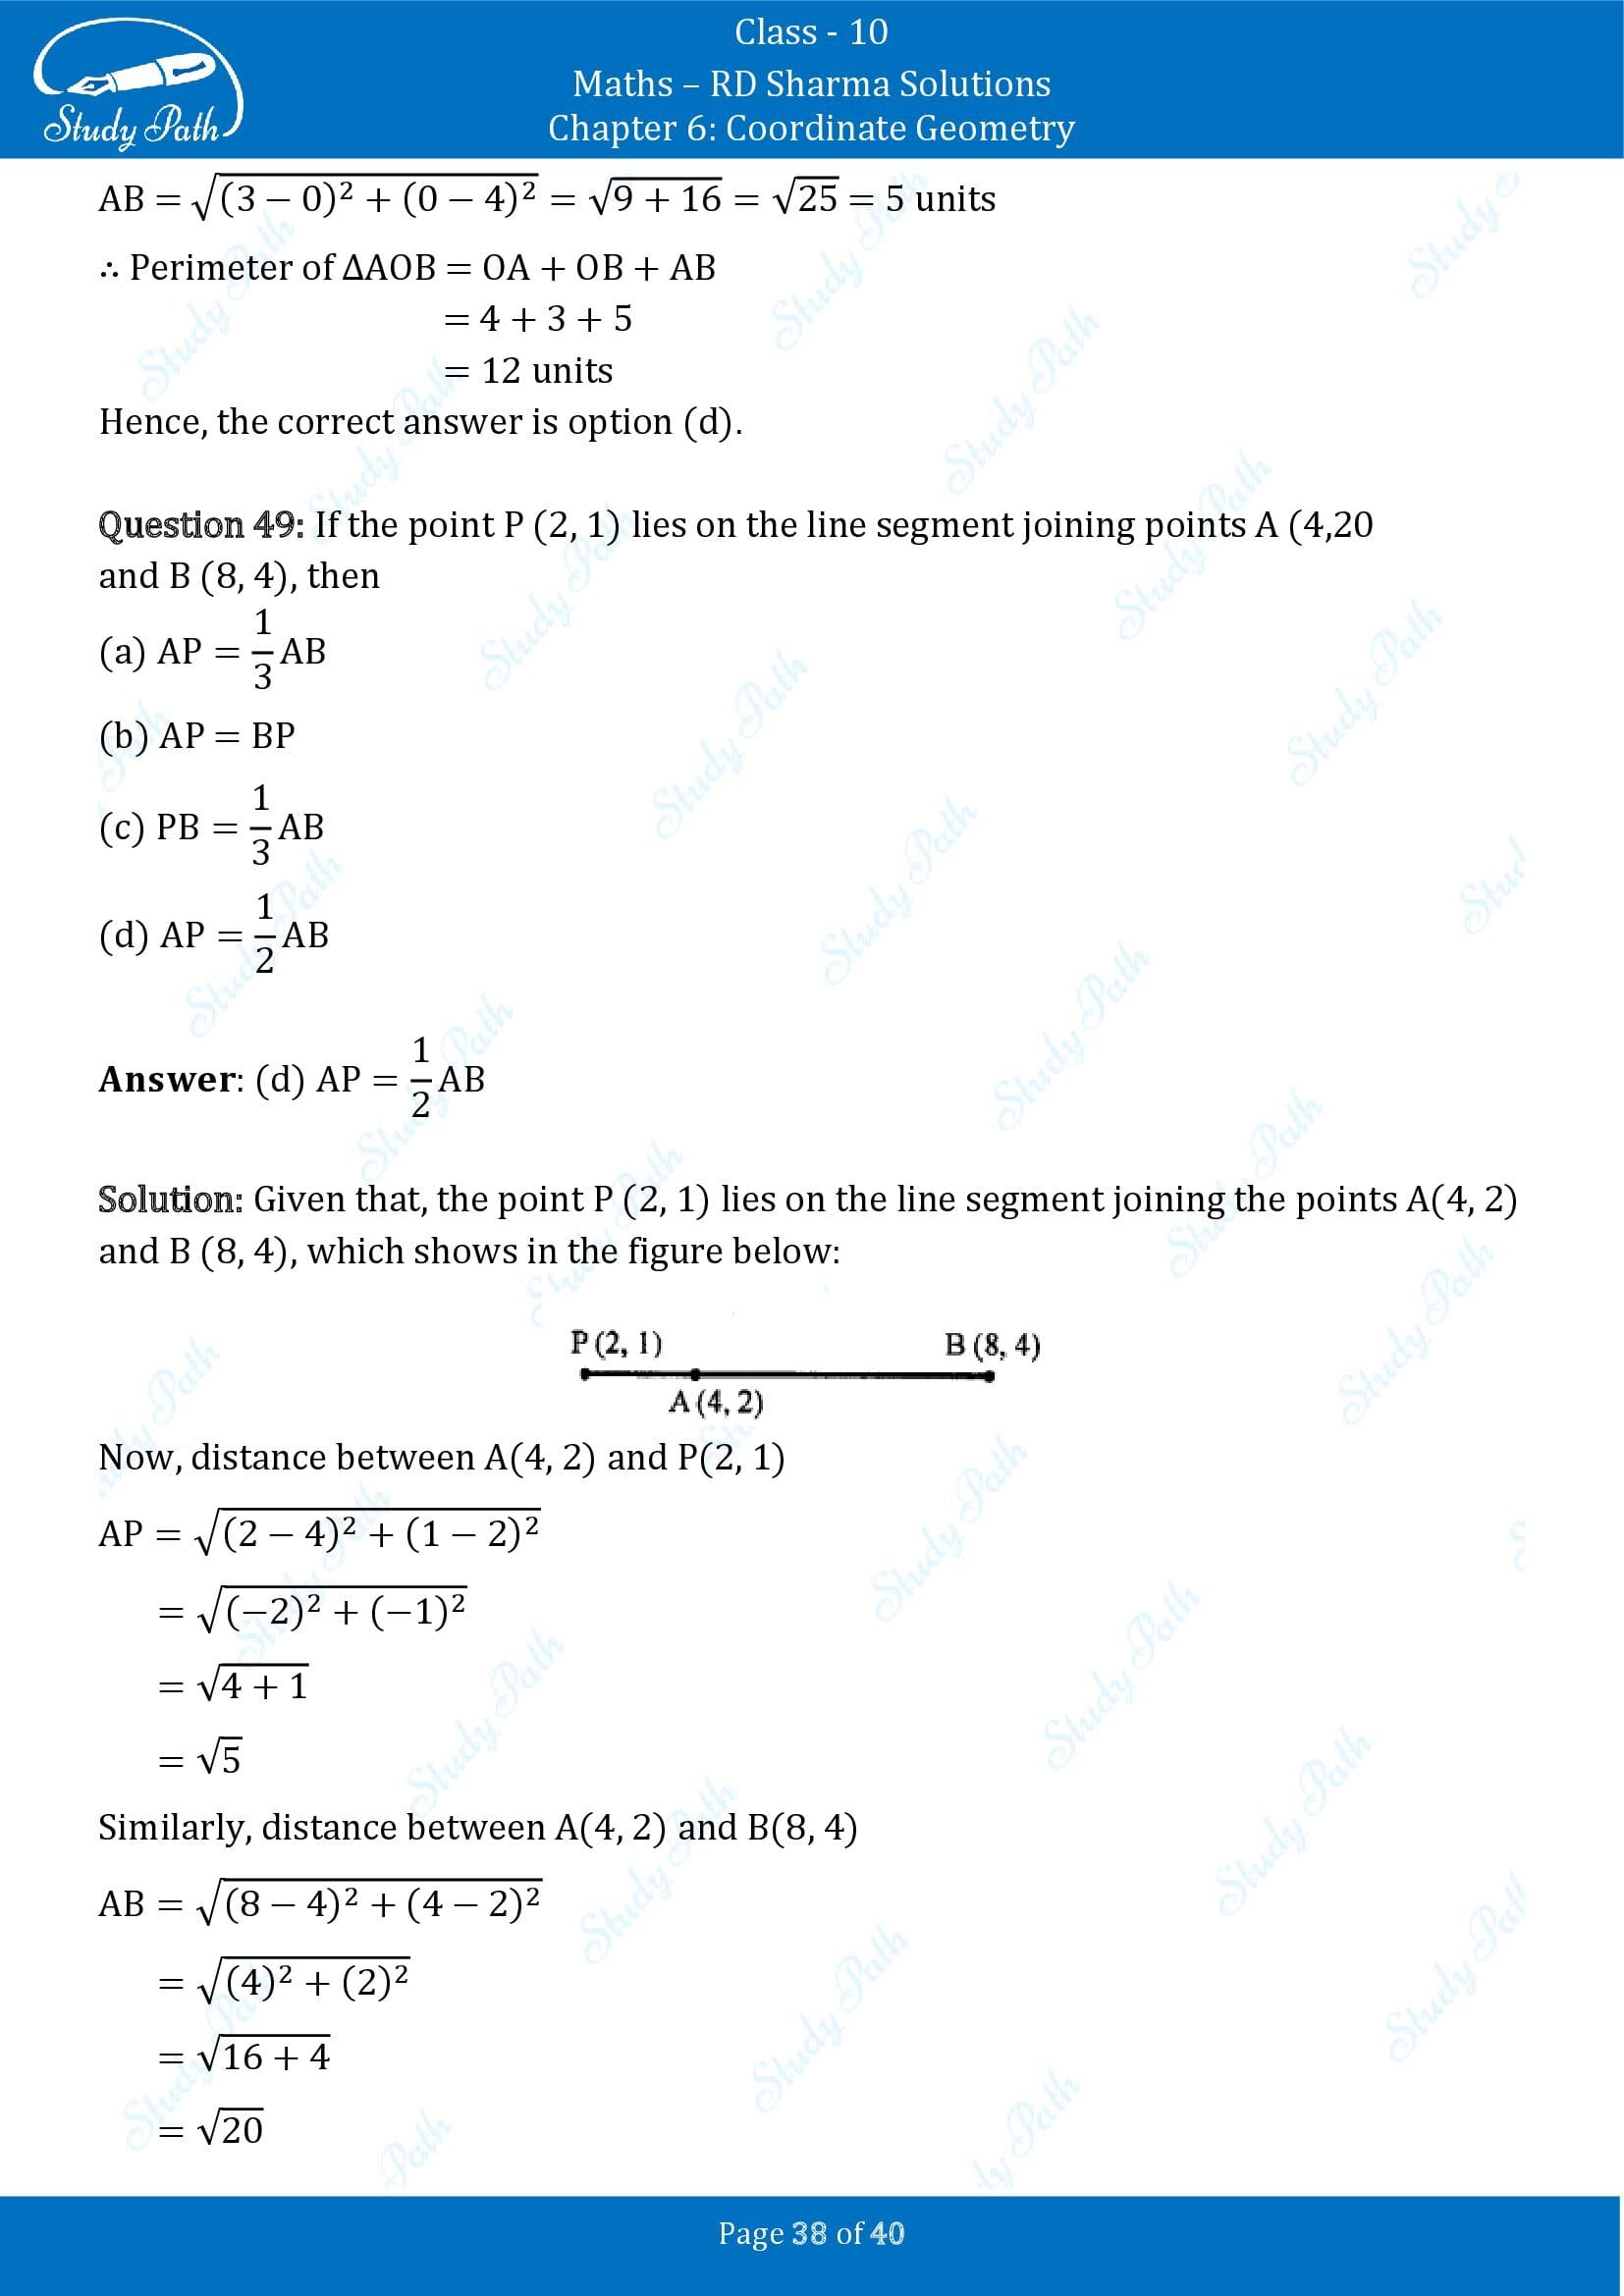 RD Sharma Solutions Class 10 Chapter 6 Coordinate Geometry Multiple Choice Question MCQs 00038